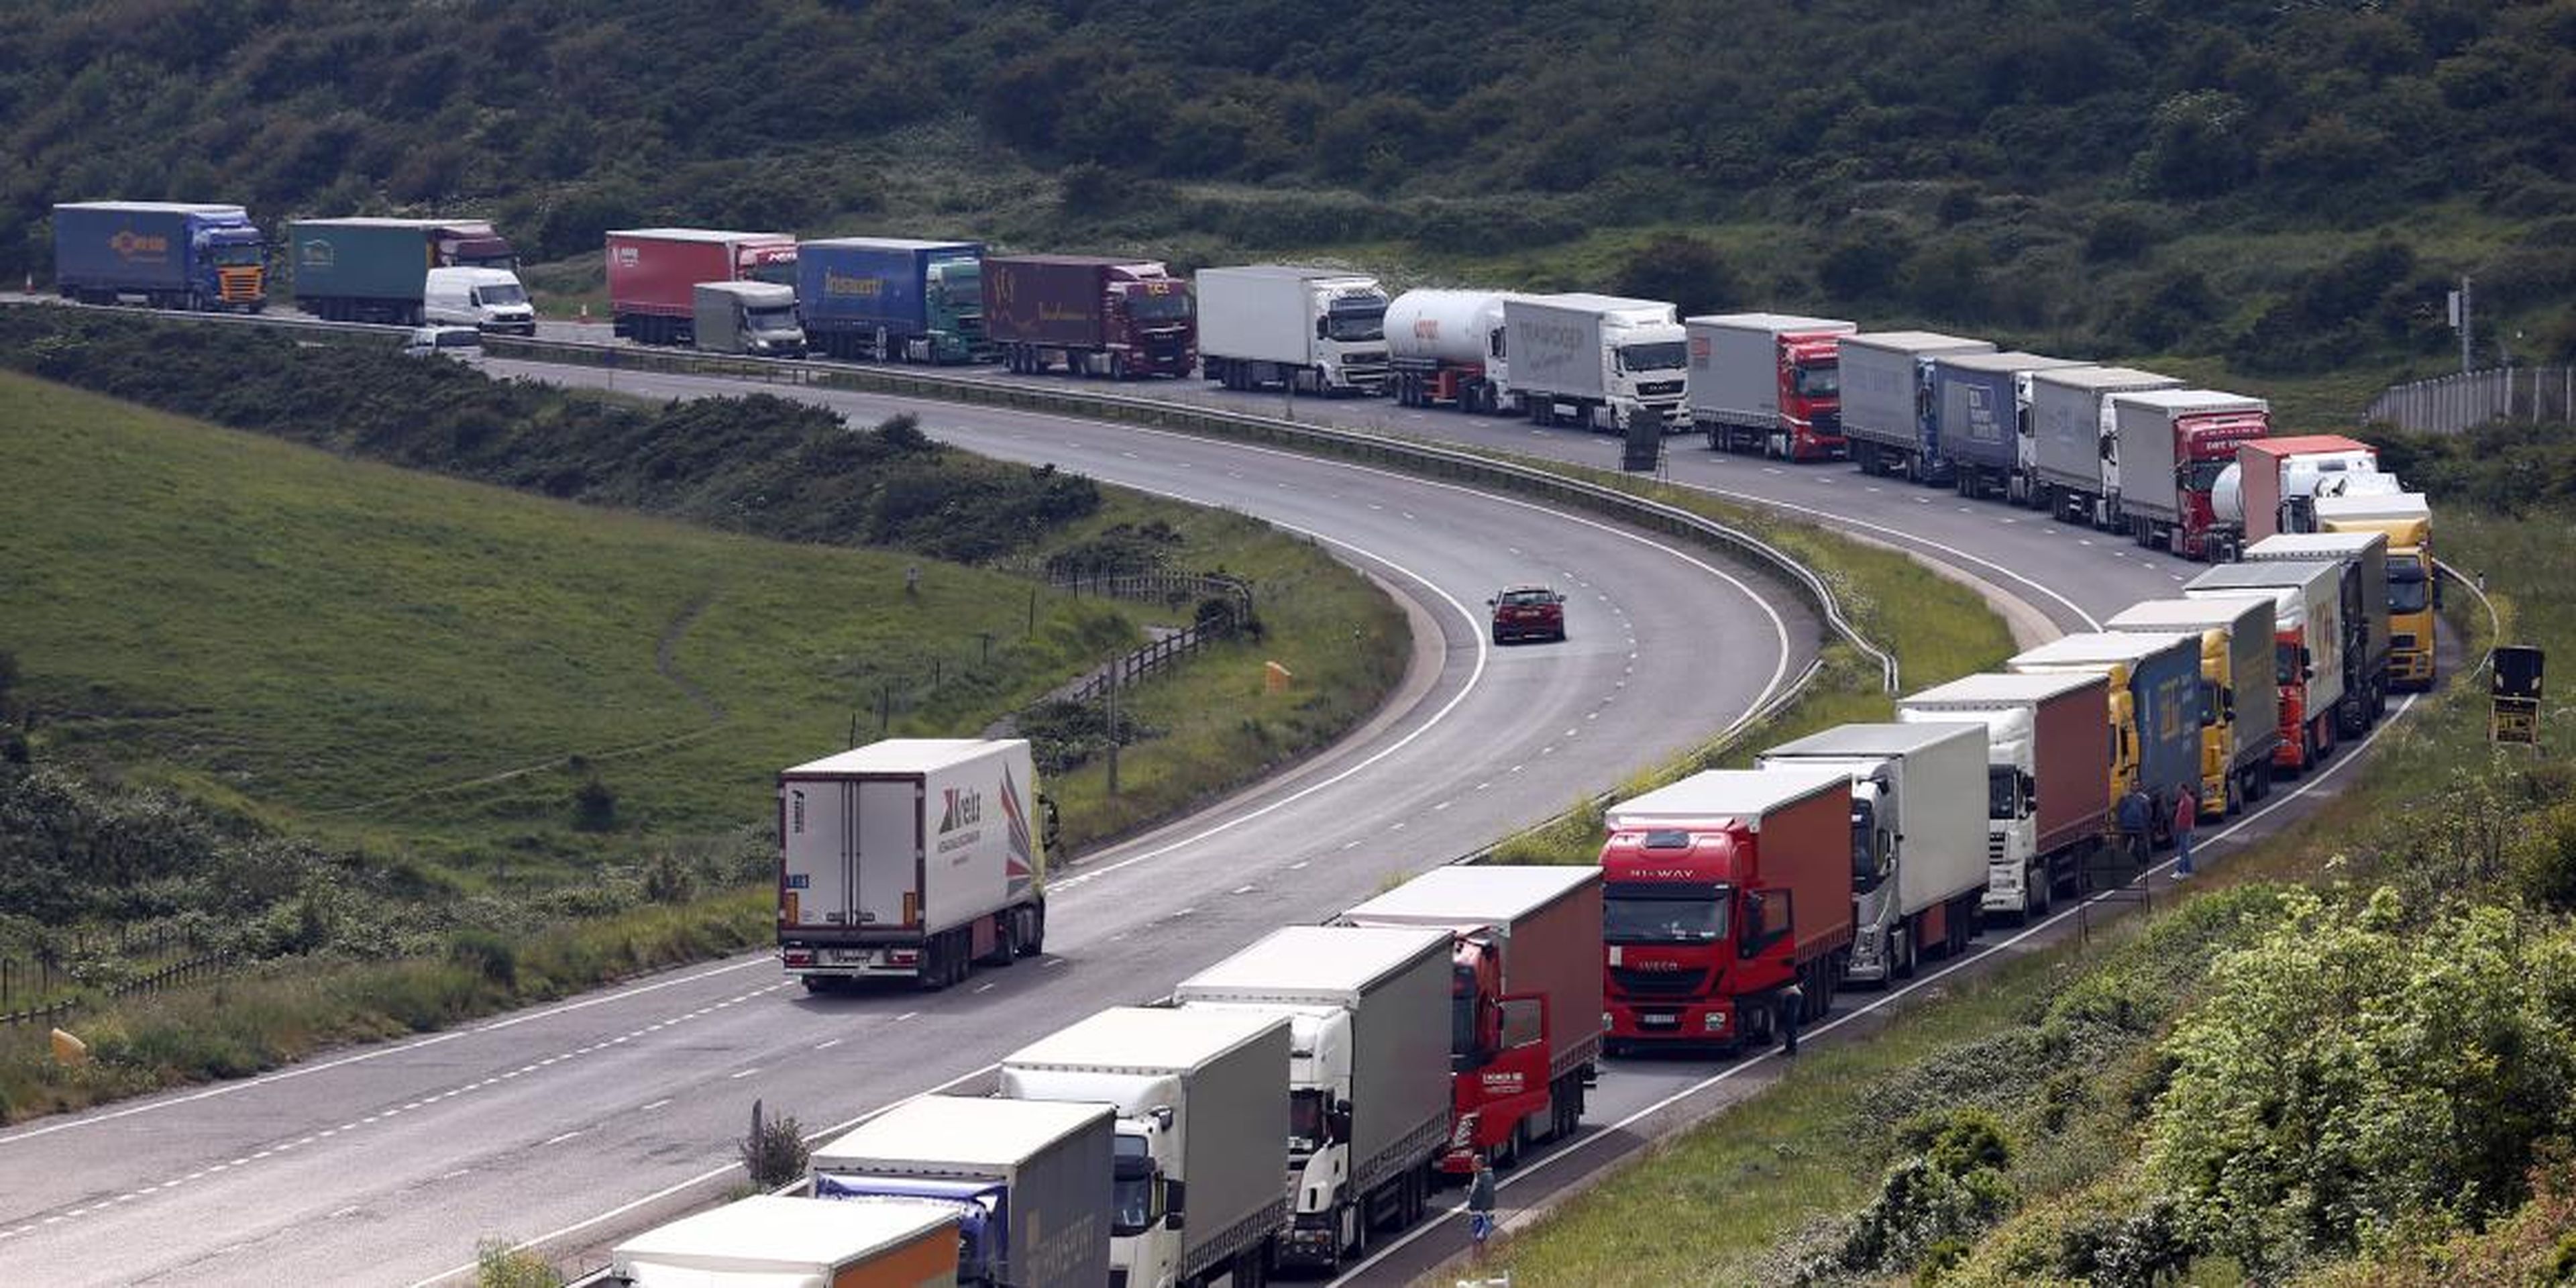 Trucks queue up as part of Operation Stack on June 23, 2015 in Dover, England. Ferry workers blockaded the port of Calais in a protest over job cuts earlier on Tuesday.